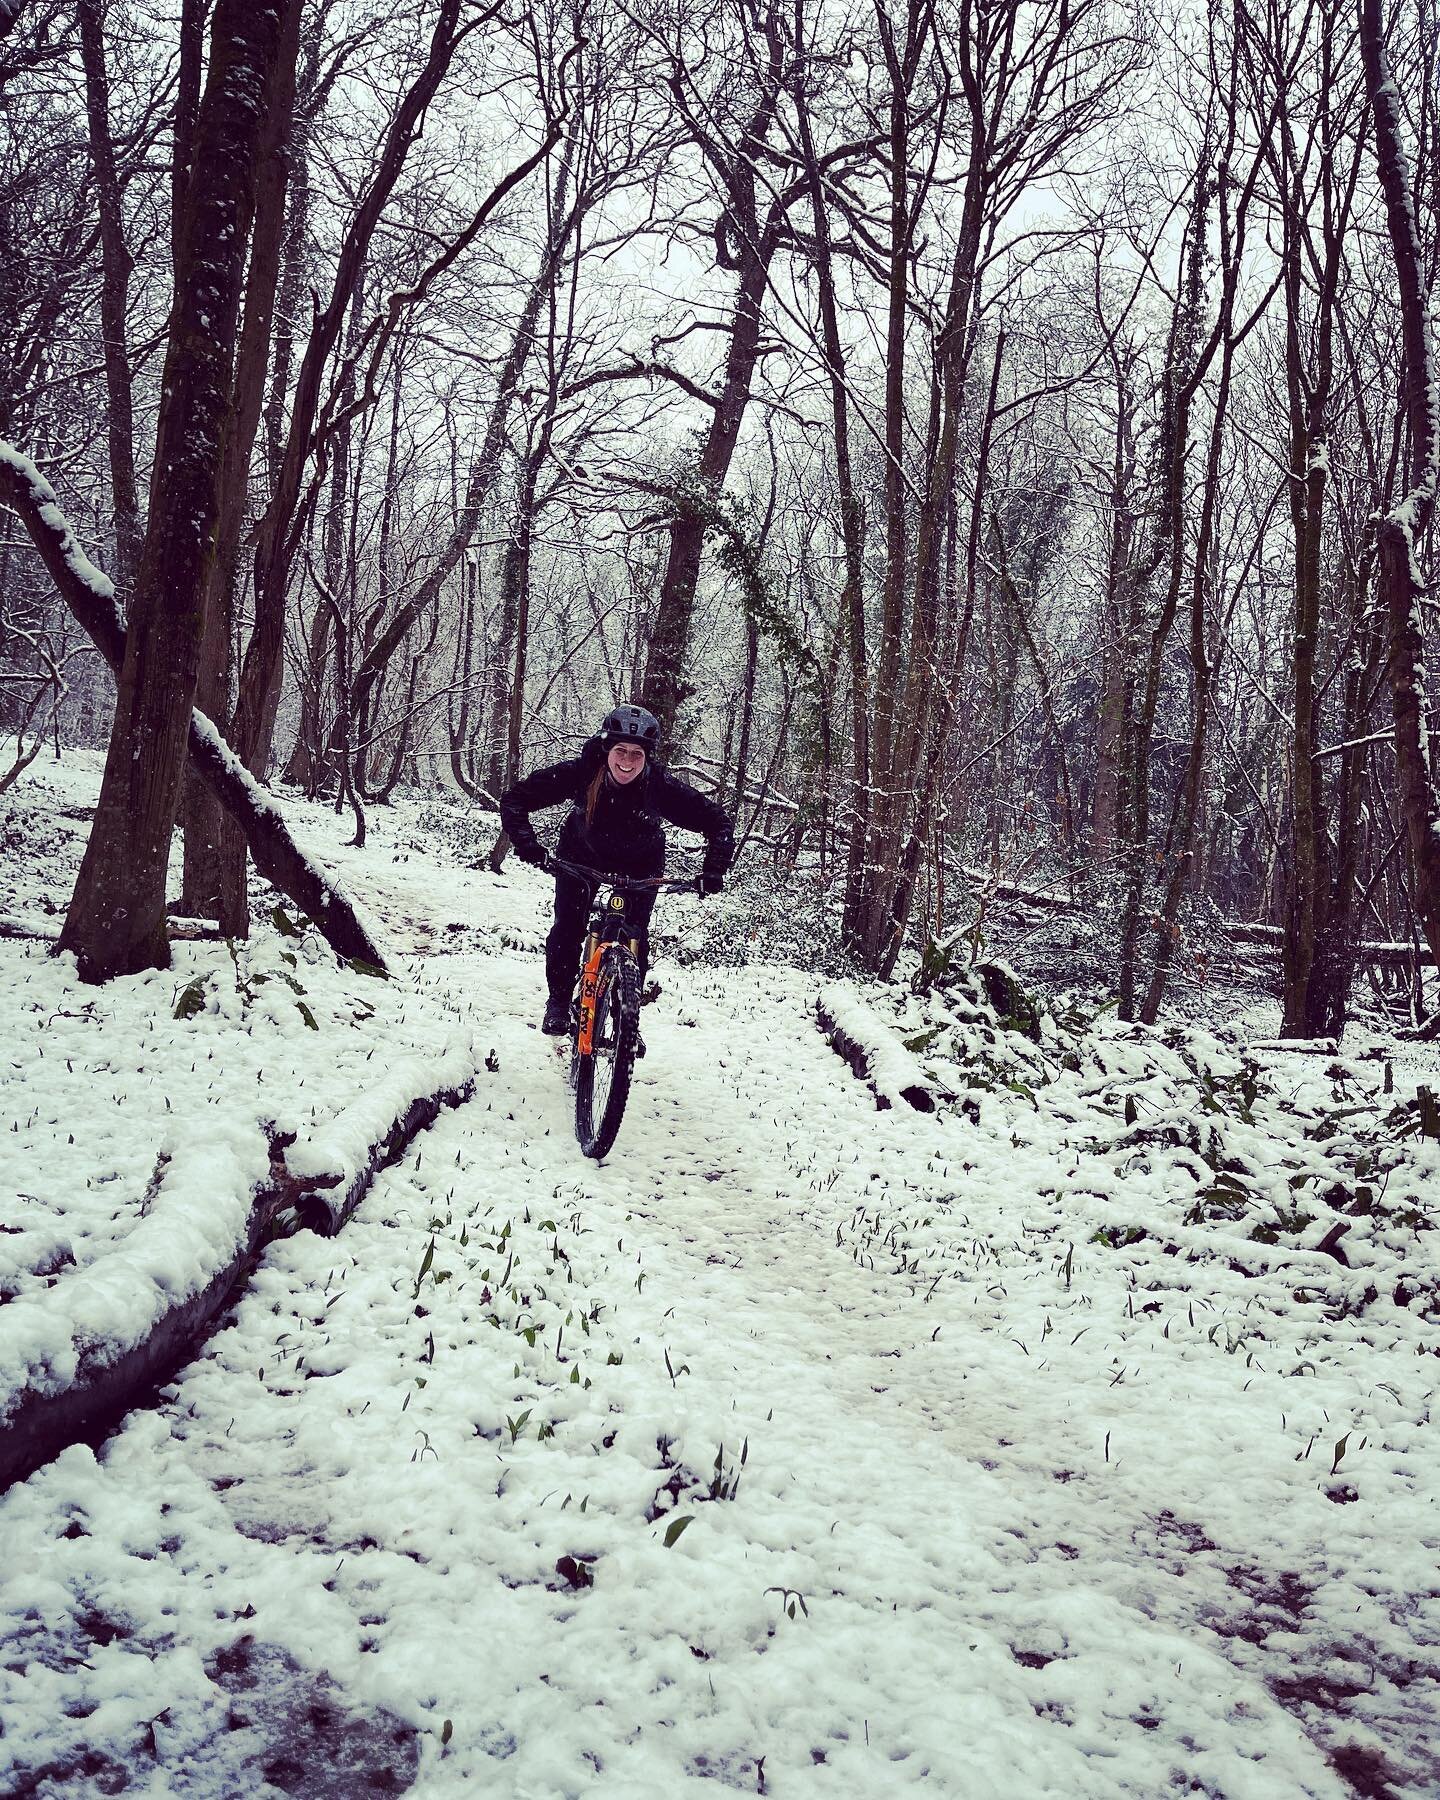 &quot;We don't stop playing because we grow old; we grow old because we stop playing&quot;

#nevergrowup #snowday #iwd2023 #goplay #together #roam #inspire #become #empower #mtb #mtblife